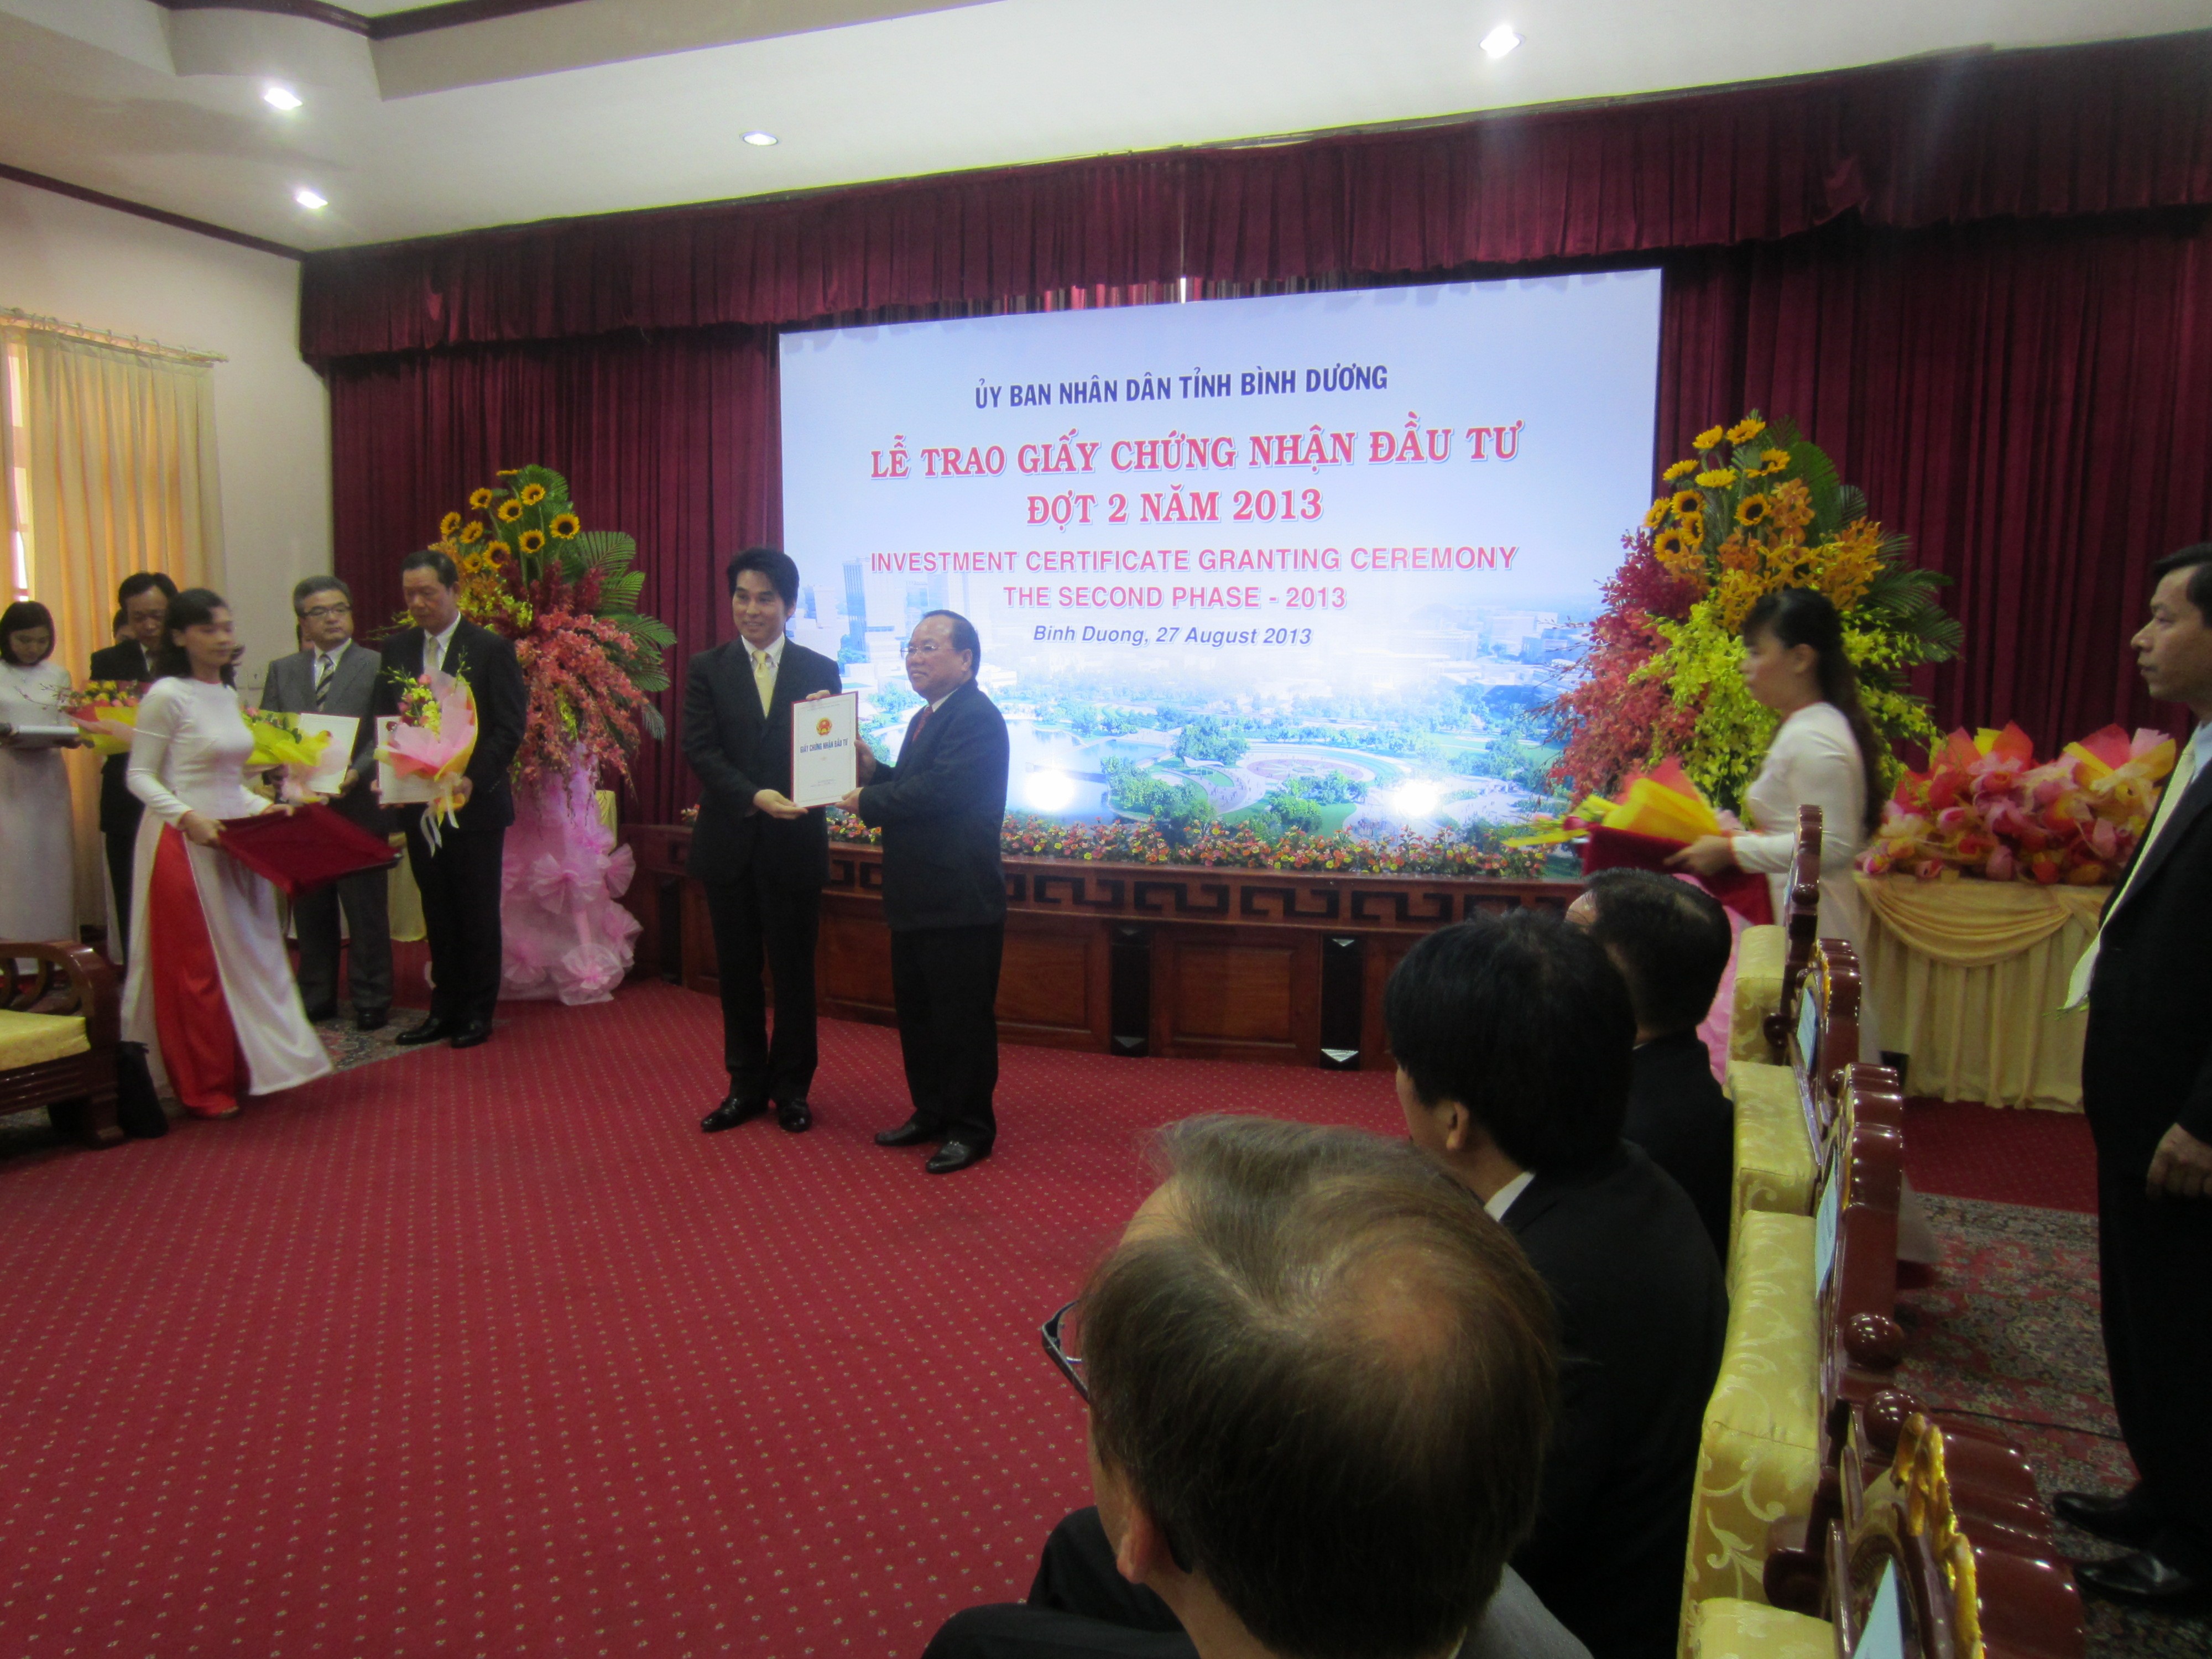 Investment Certificate Granting Ceremony The Second Phase - 2013